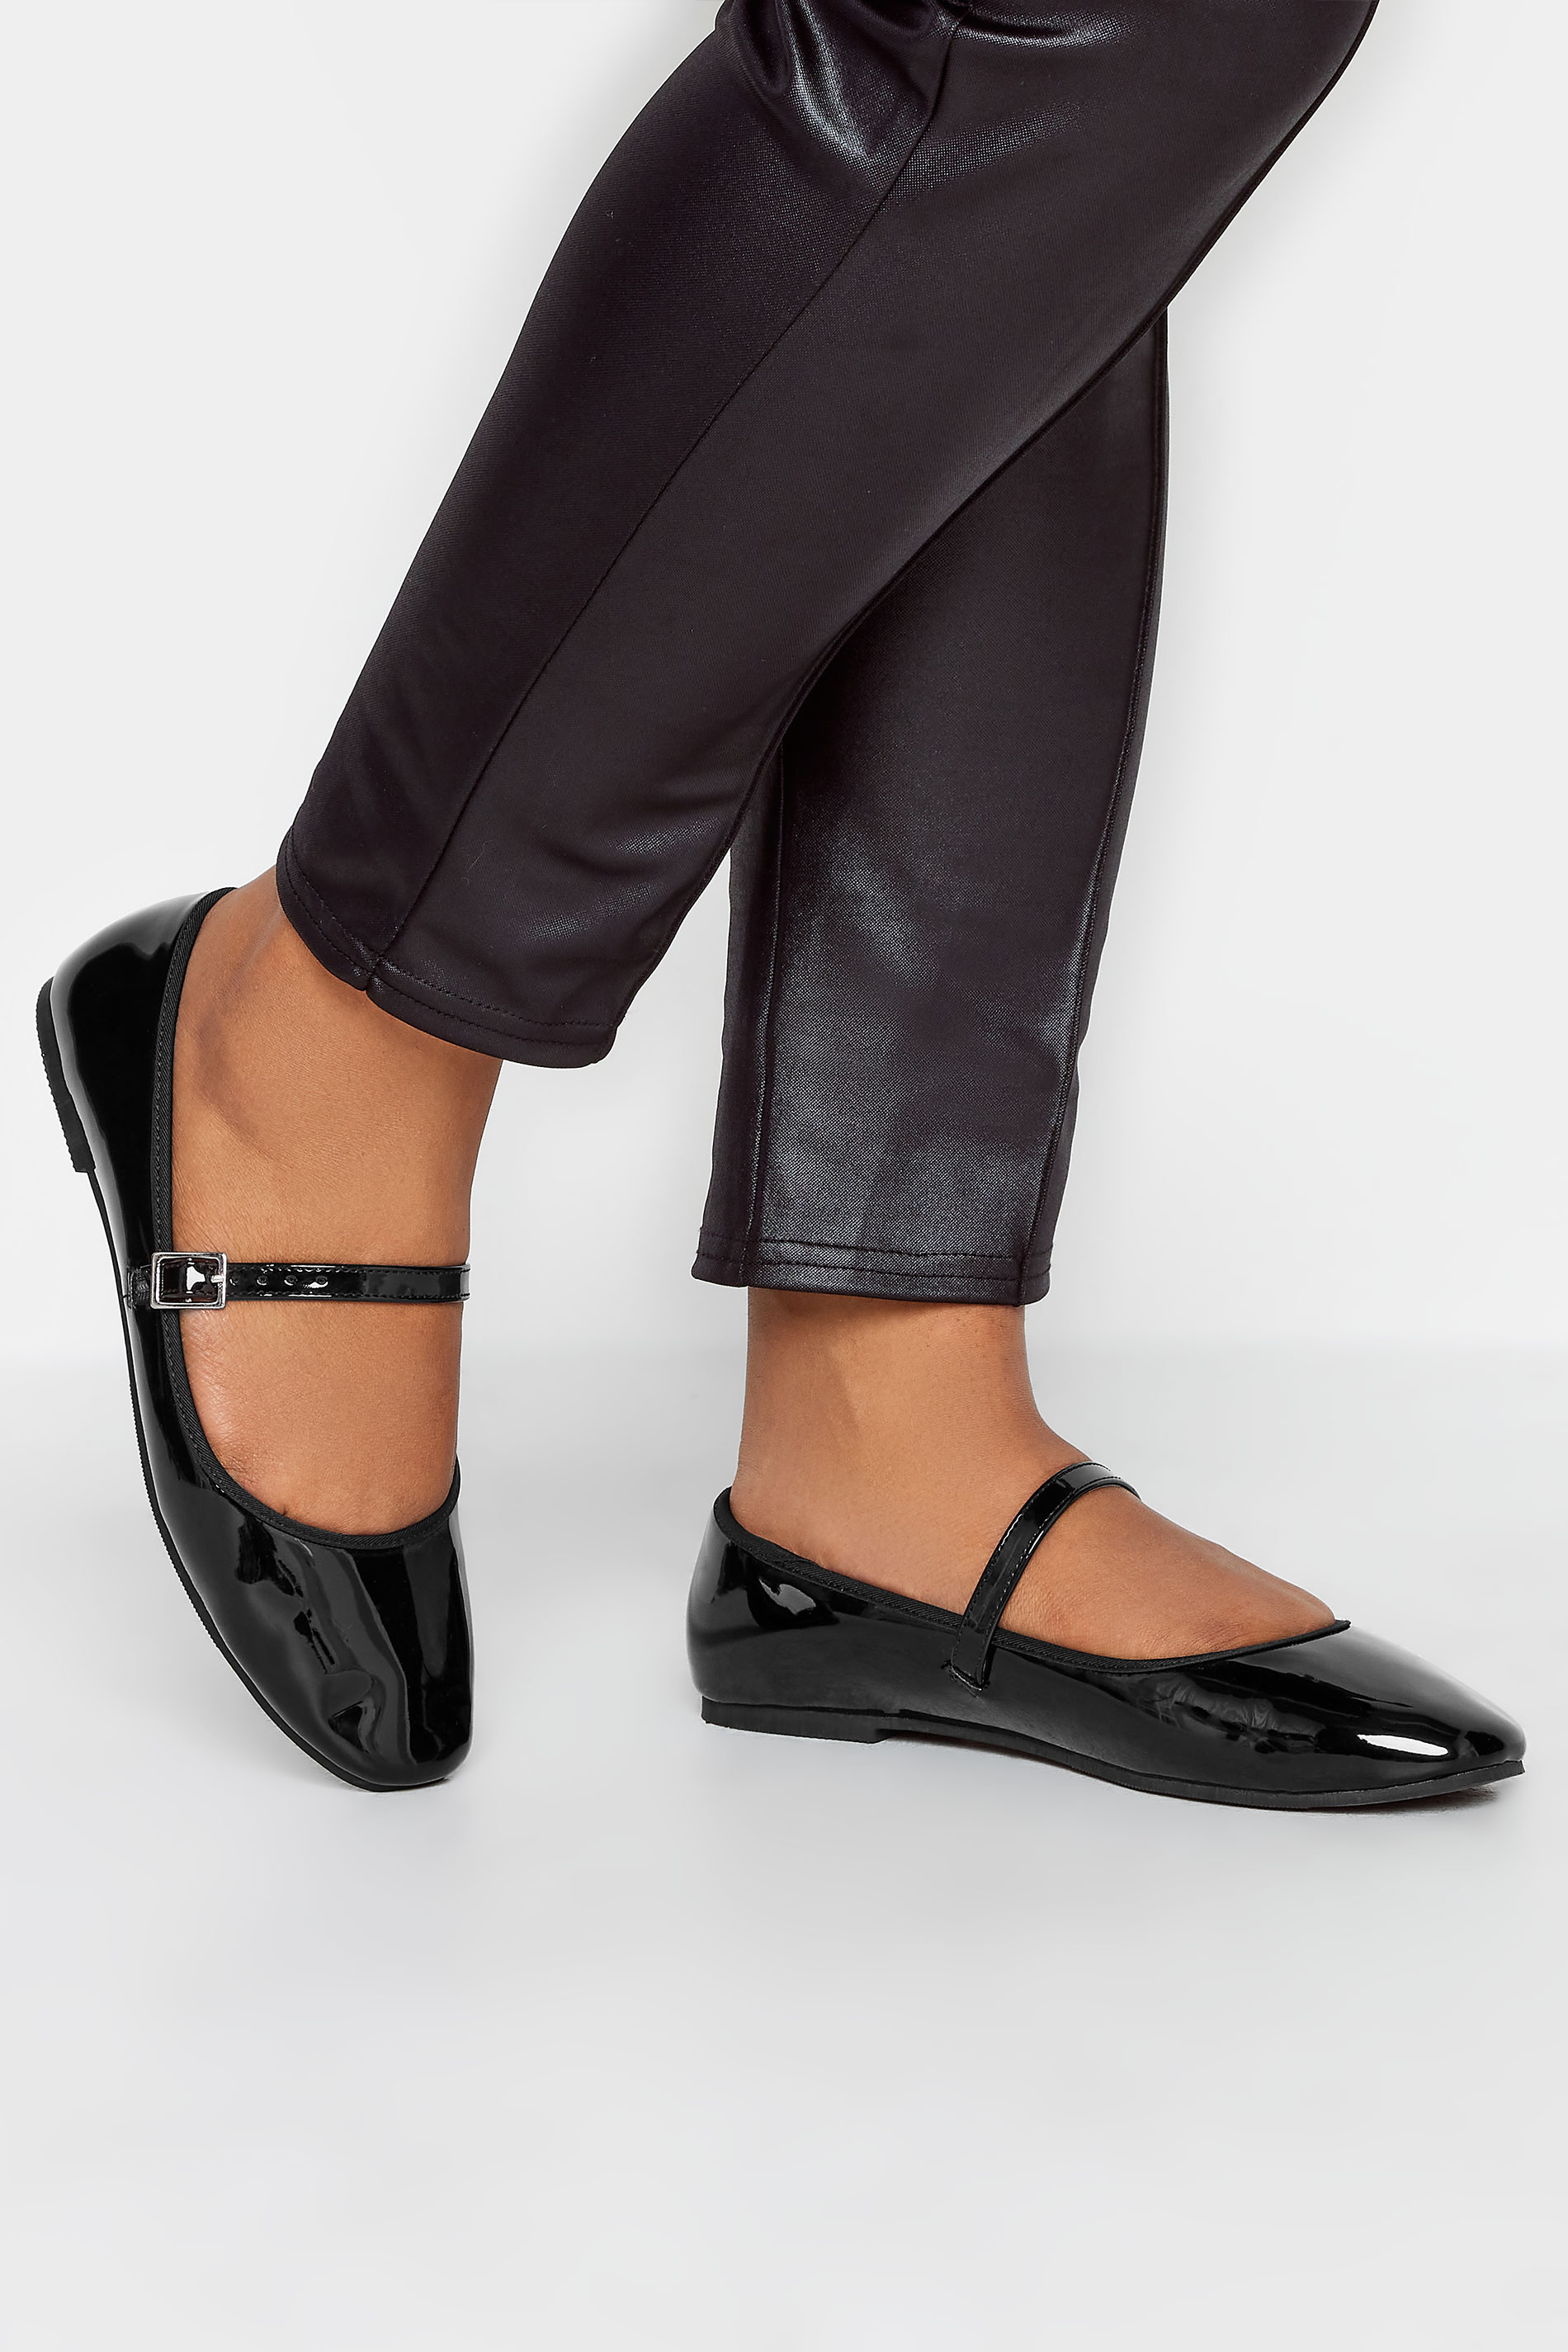 Black Patent Mary Jane Ballerina Pumps In Wide E Fit & Extra Wide EEE Fit | Yours Clothing  1